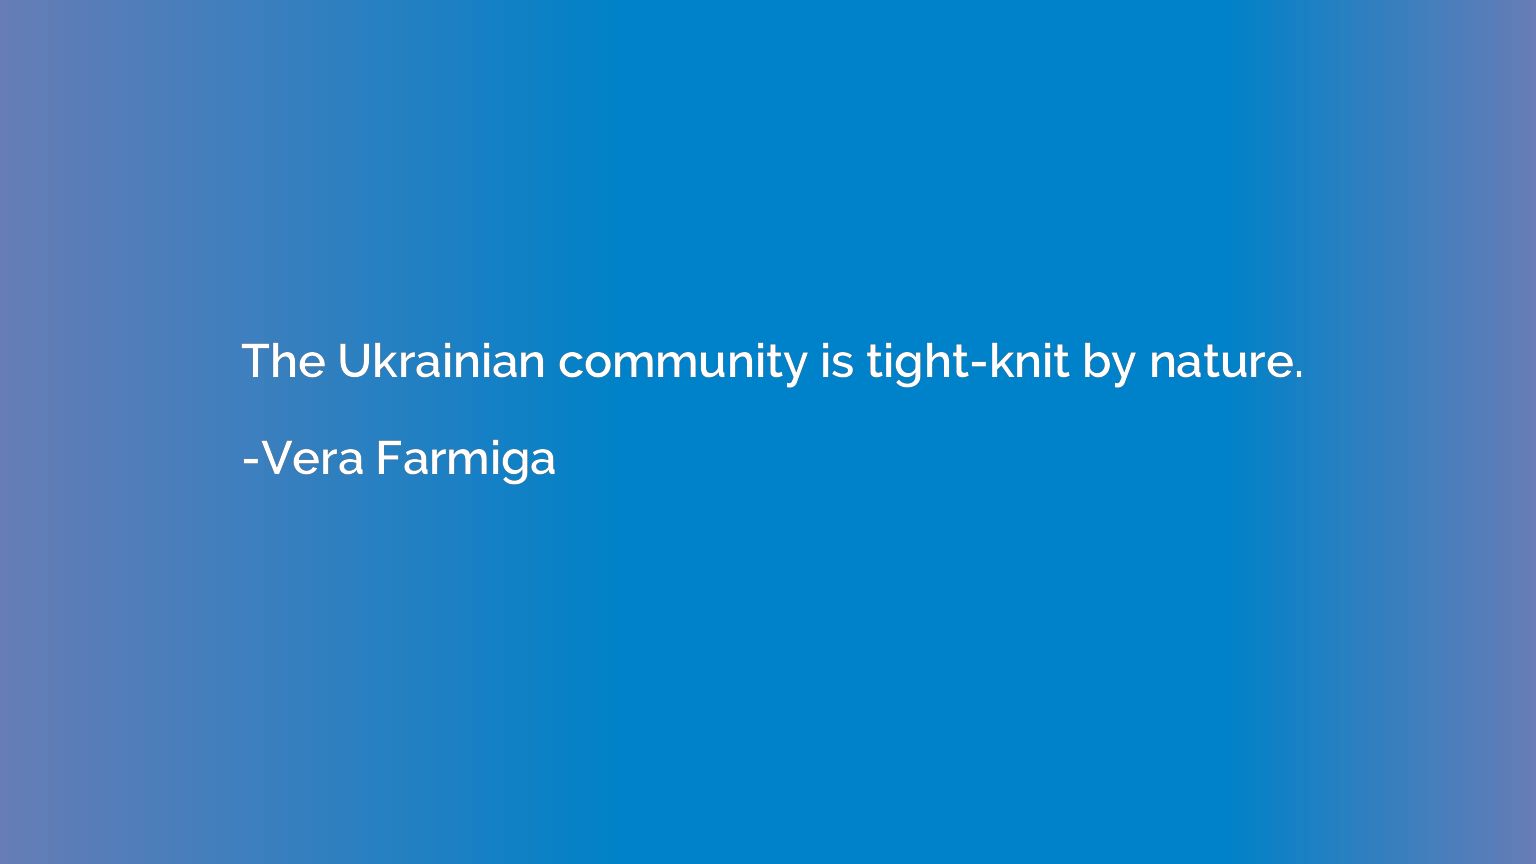 The Ukrainian community is tight-knit by nature.